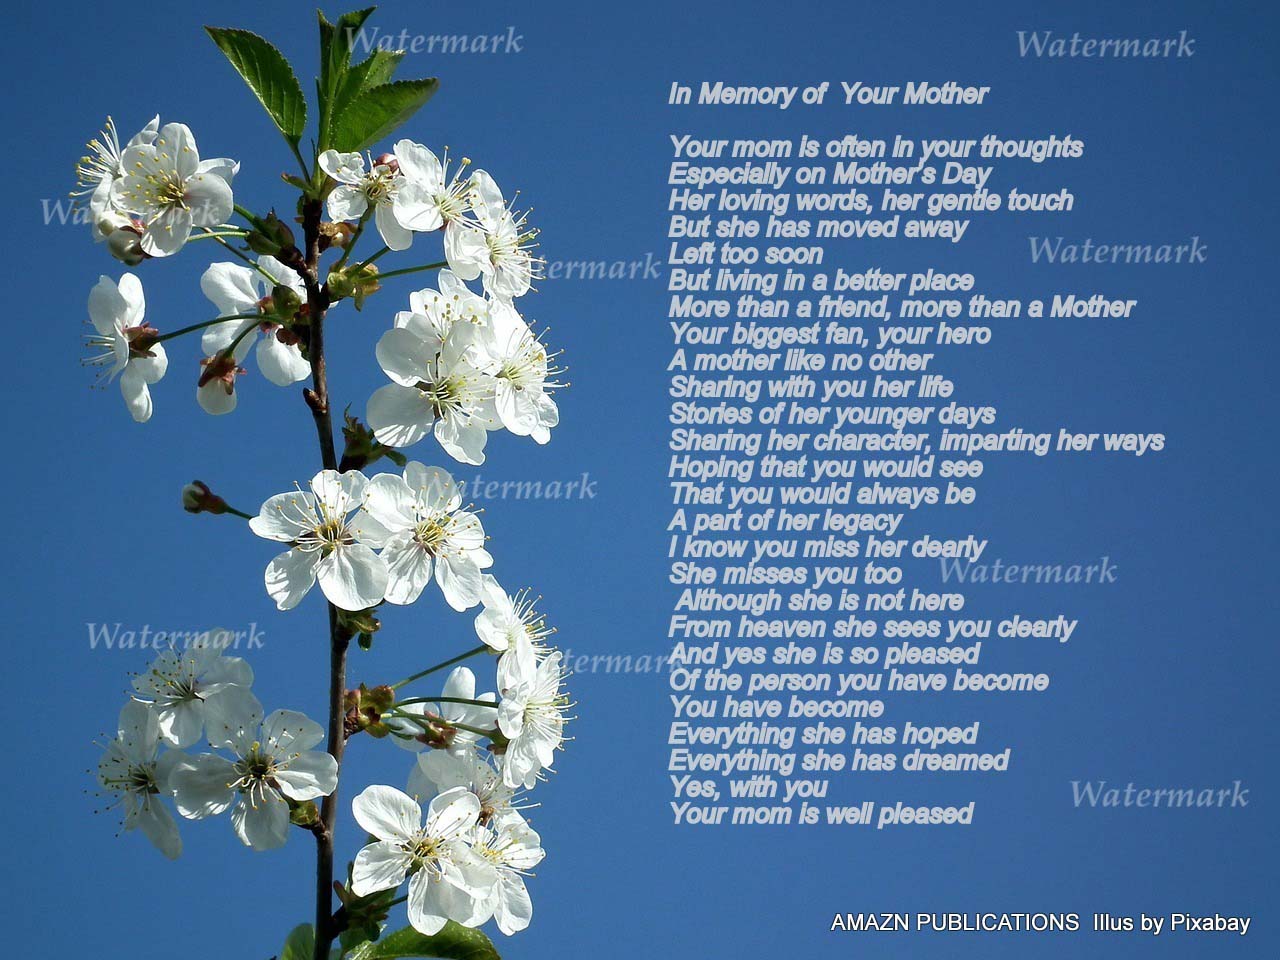 In Memory of Your Mother